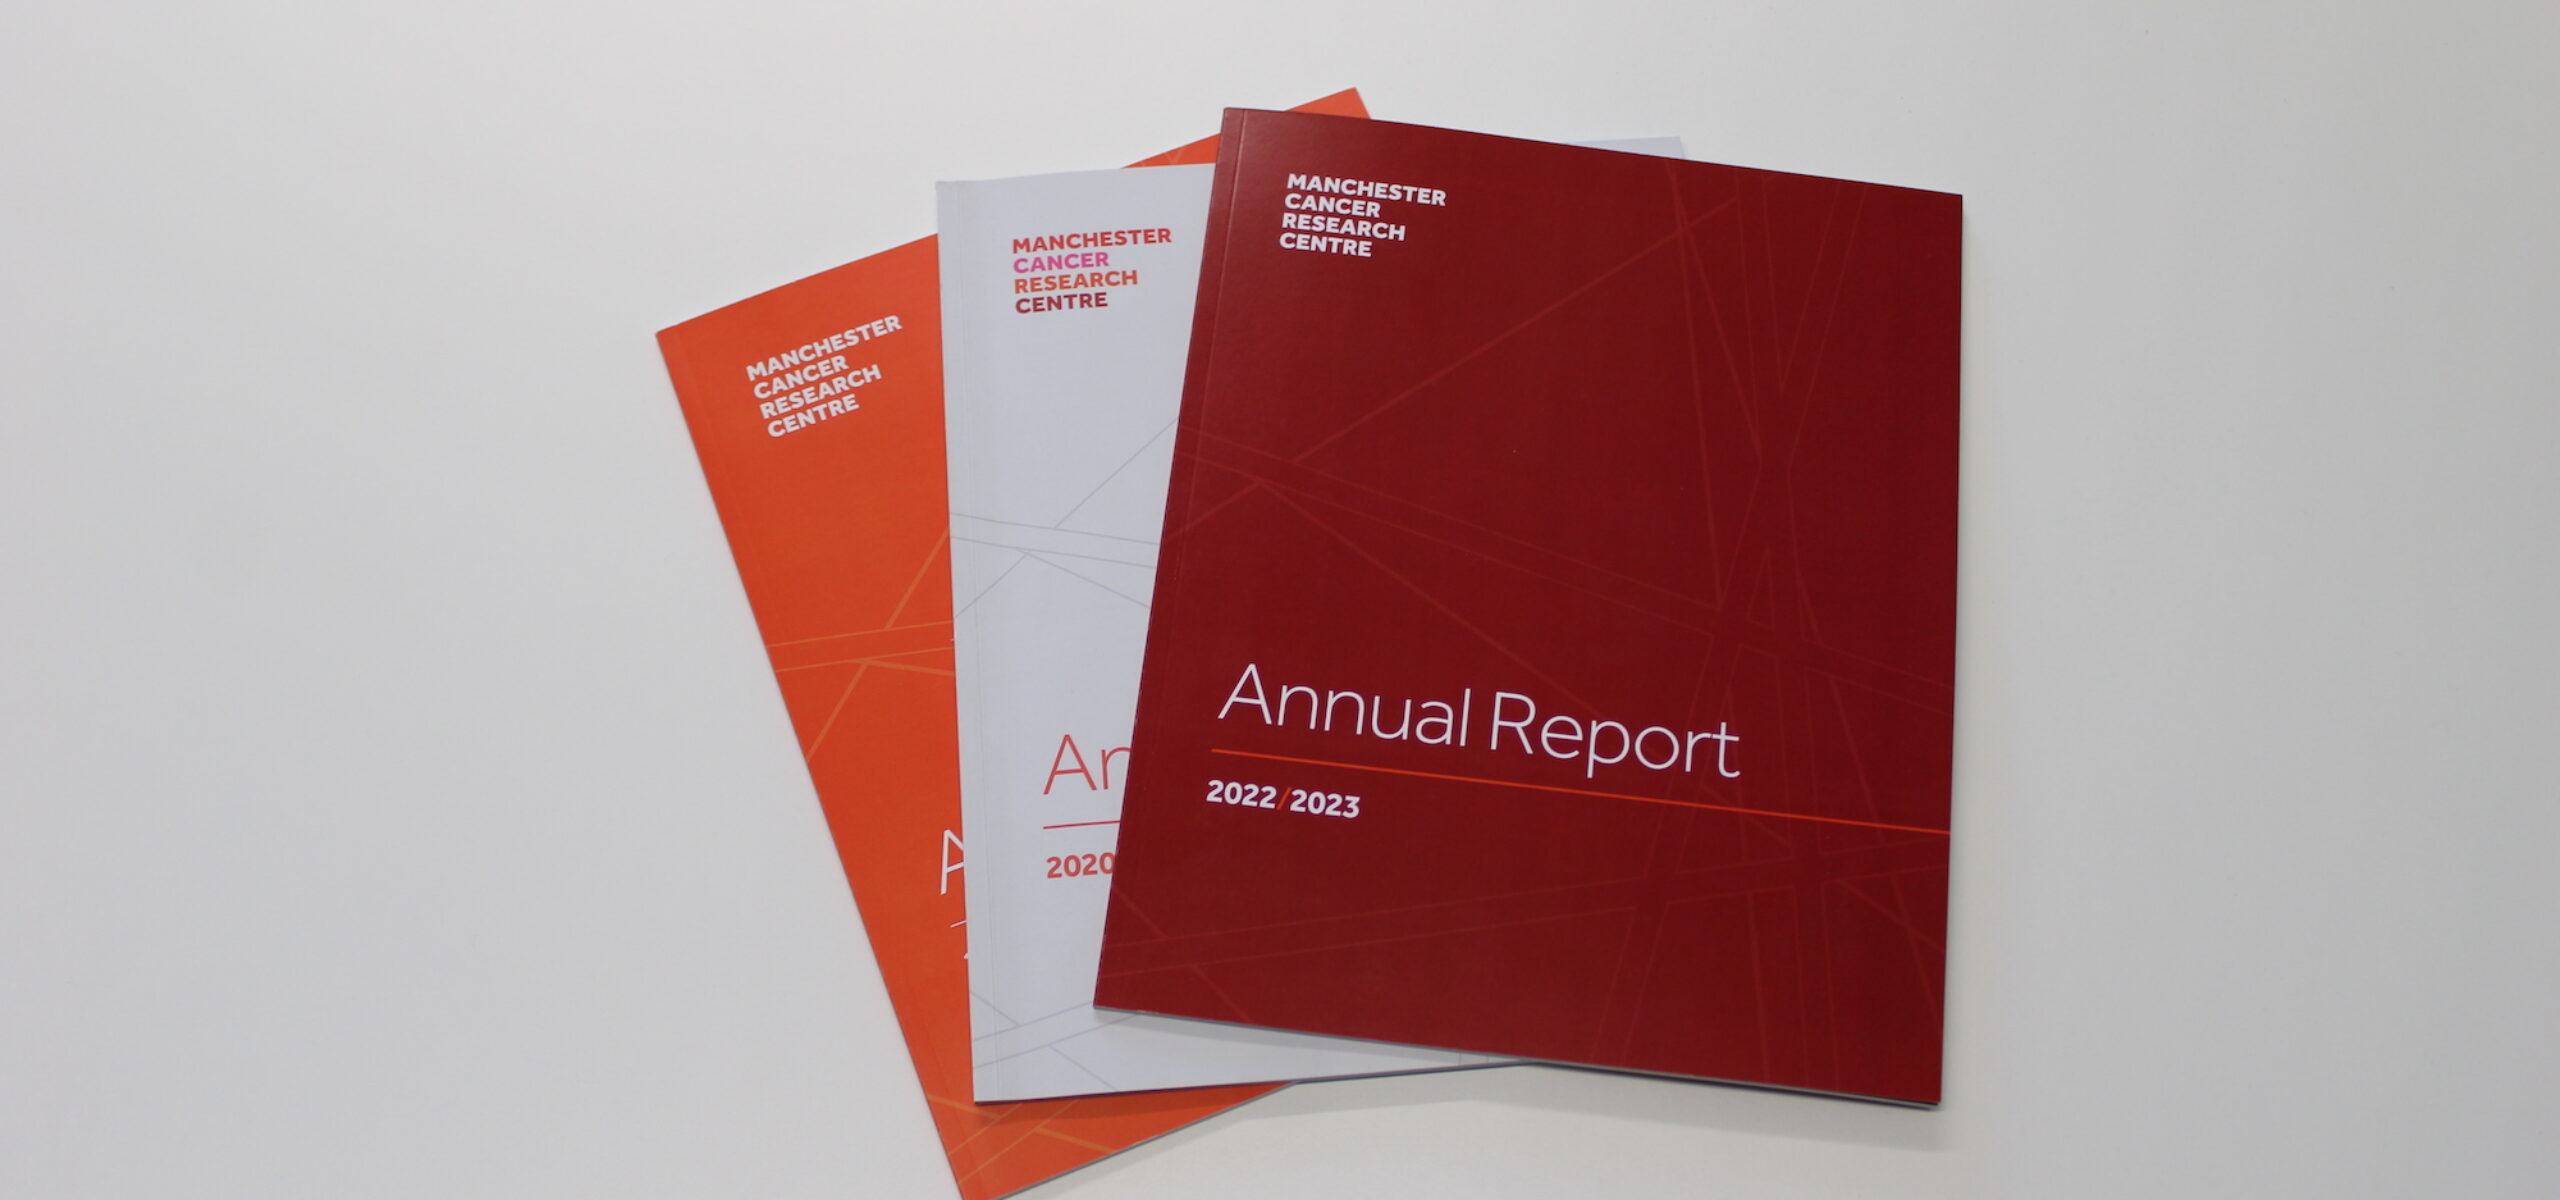 Three issues of the MCRC Annual Report stacked on top of each other with 2022/2023 issue on top